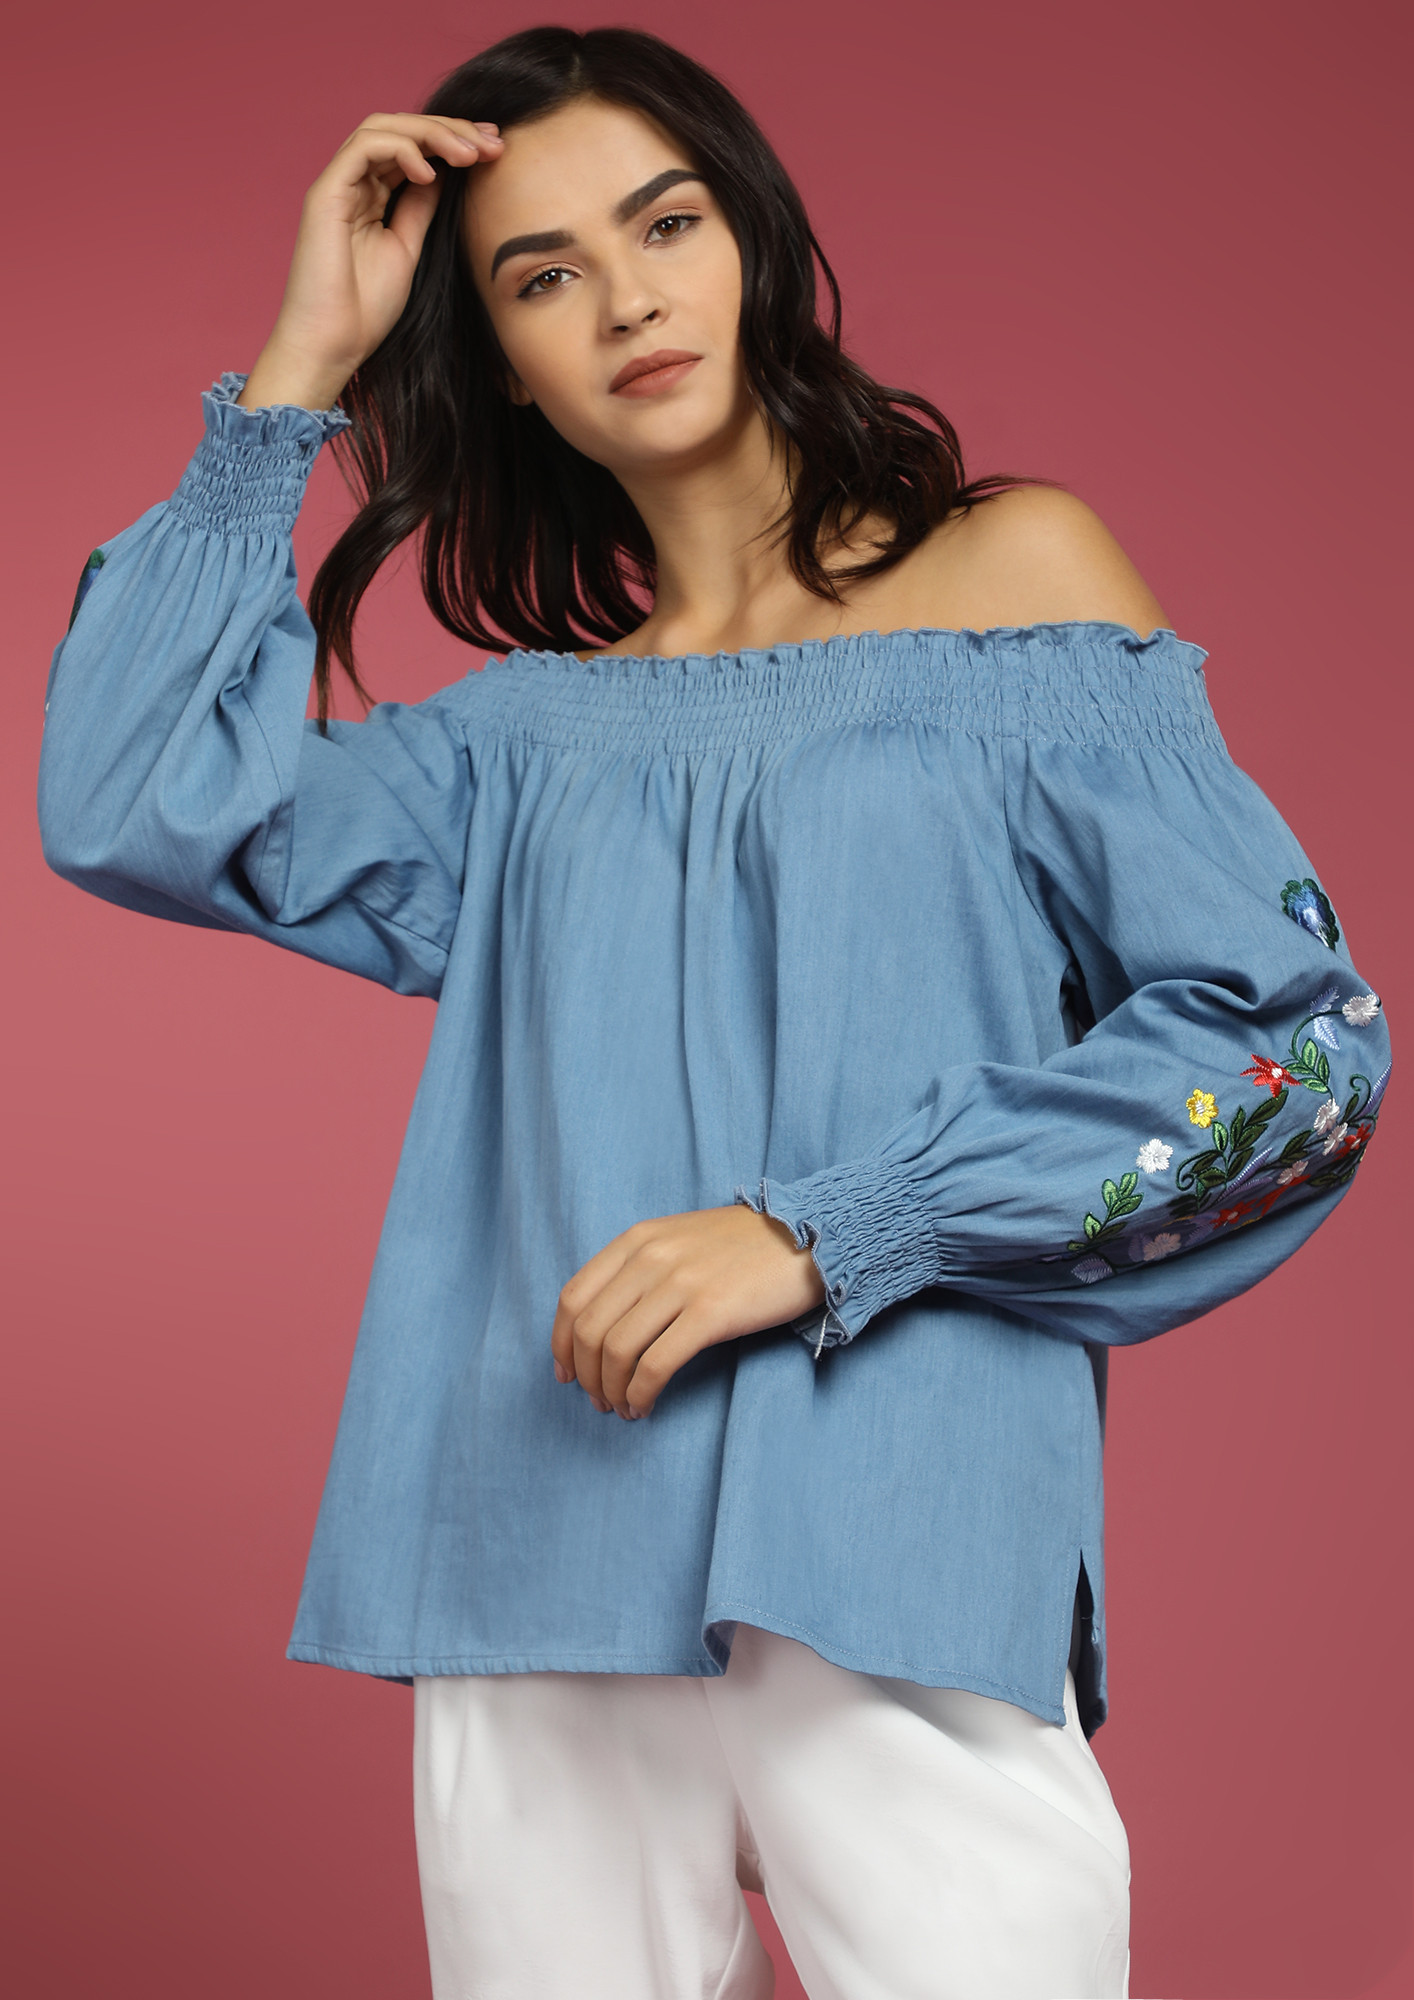 ALL OUT FOR THE SUN BLUE OFF-SHOULDER TOP